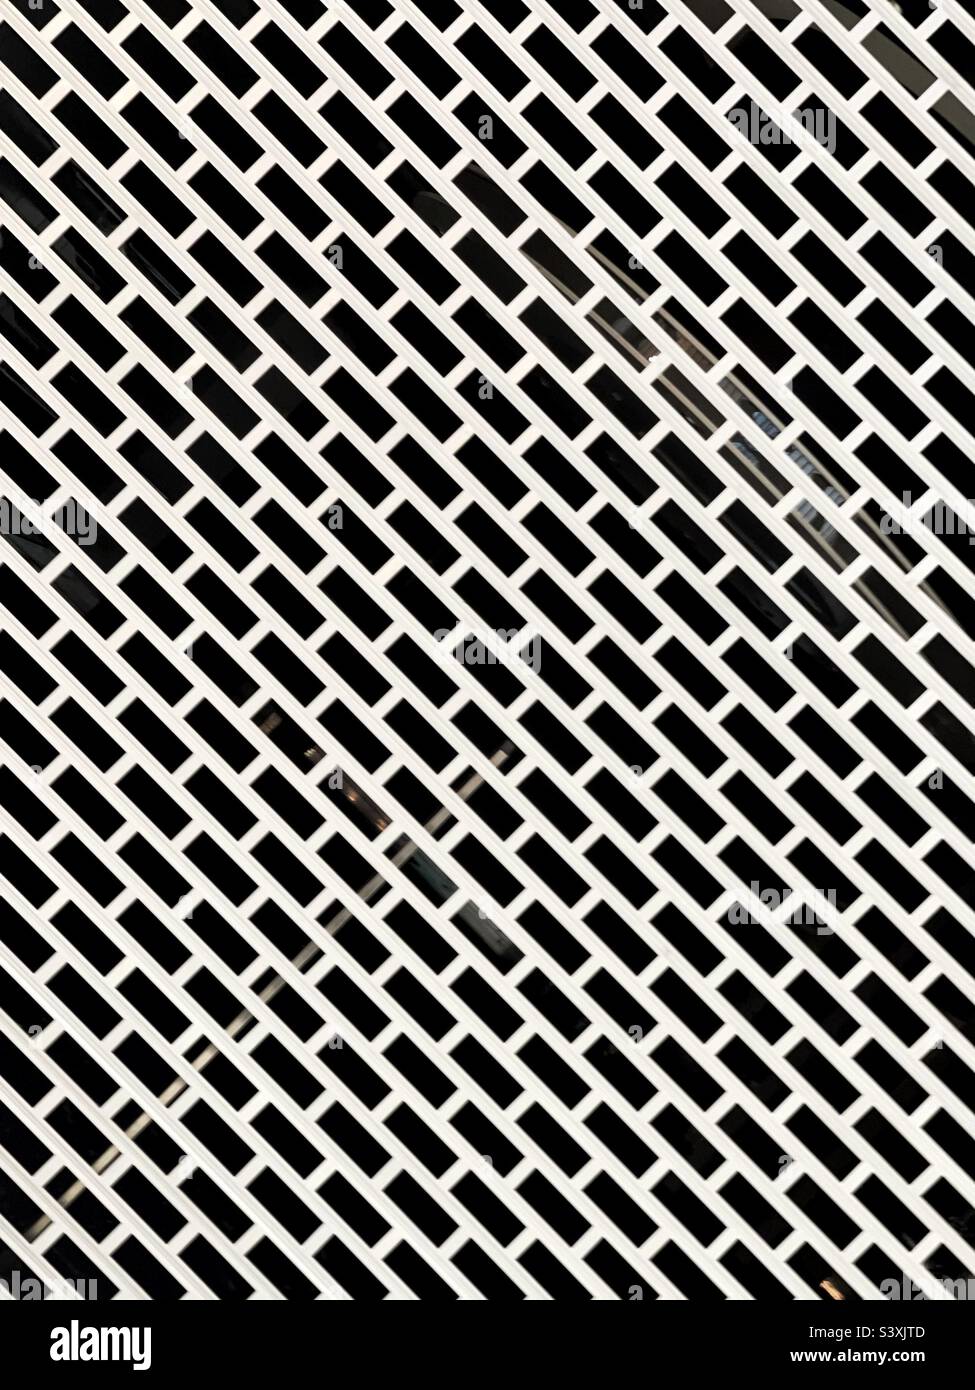 Pattern formed by the metal security grille on the entrance to a shop. No people. Stock Photo